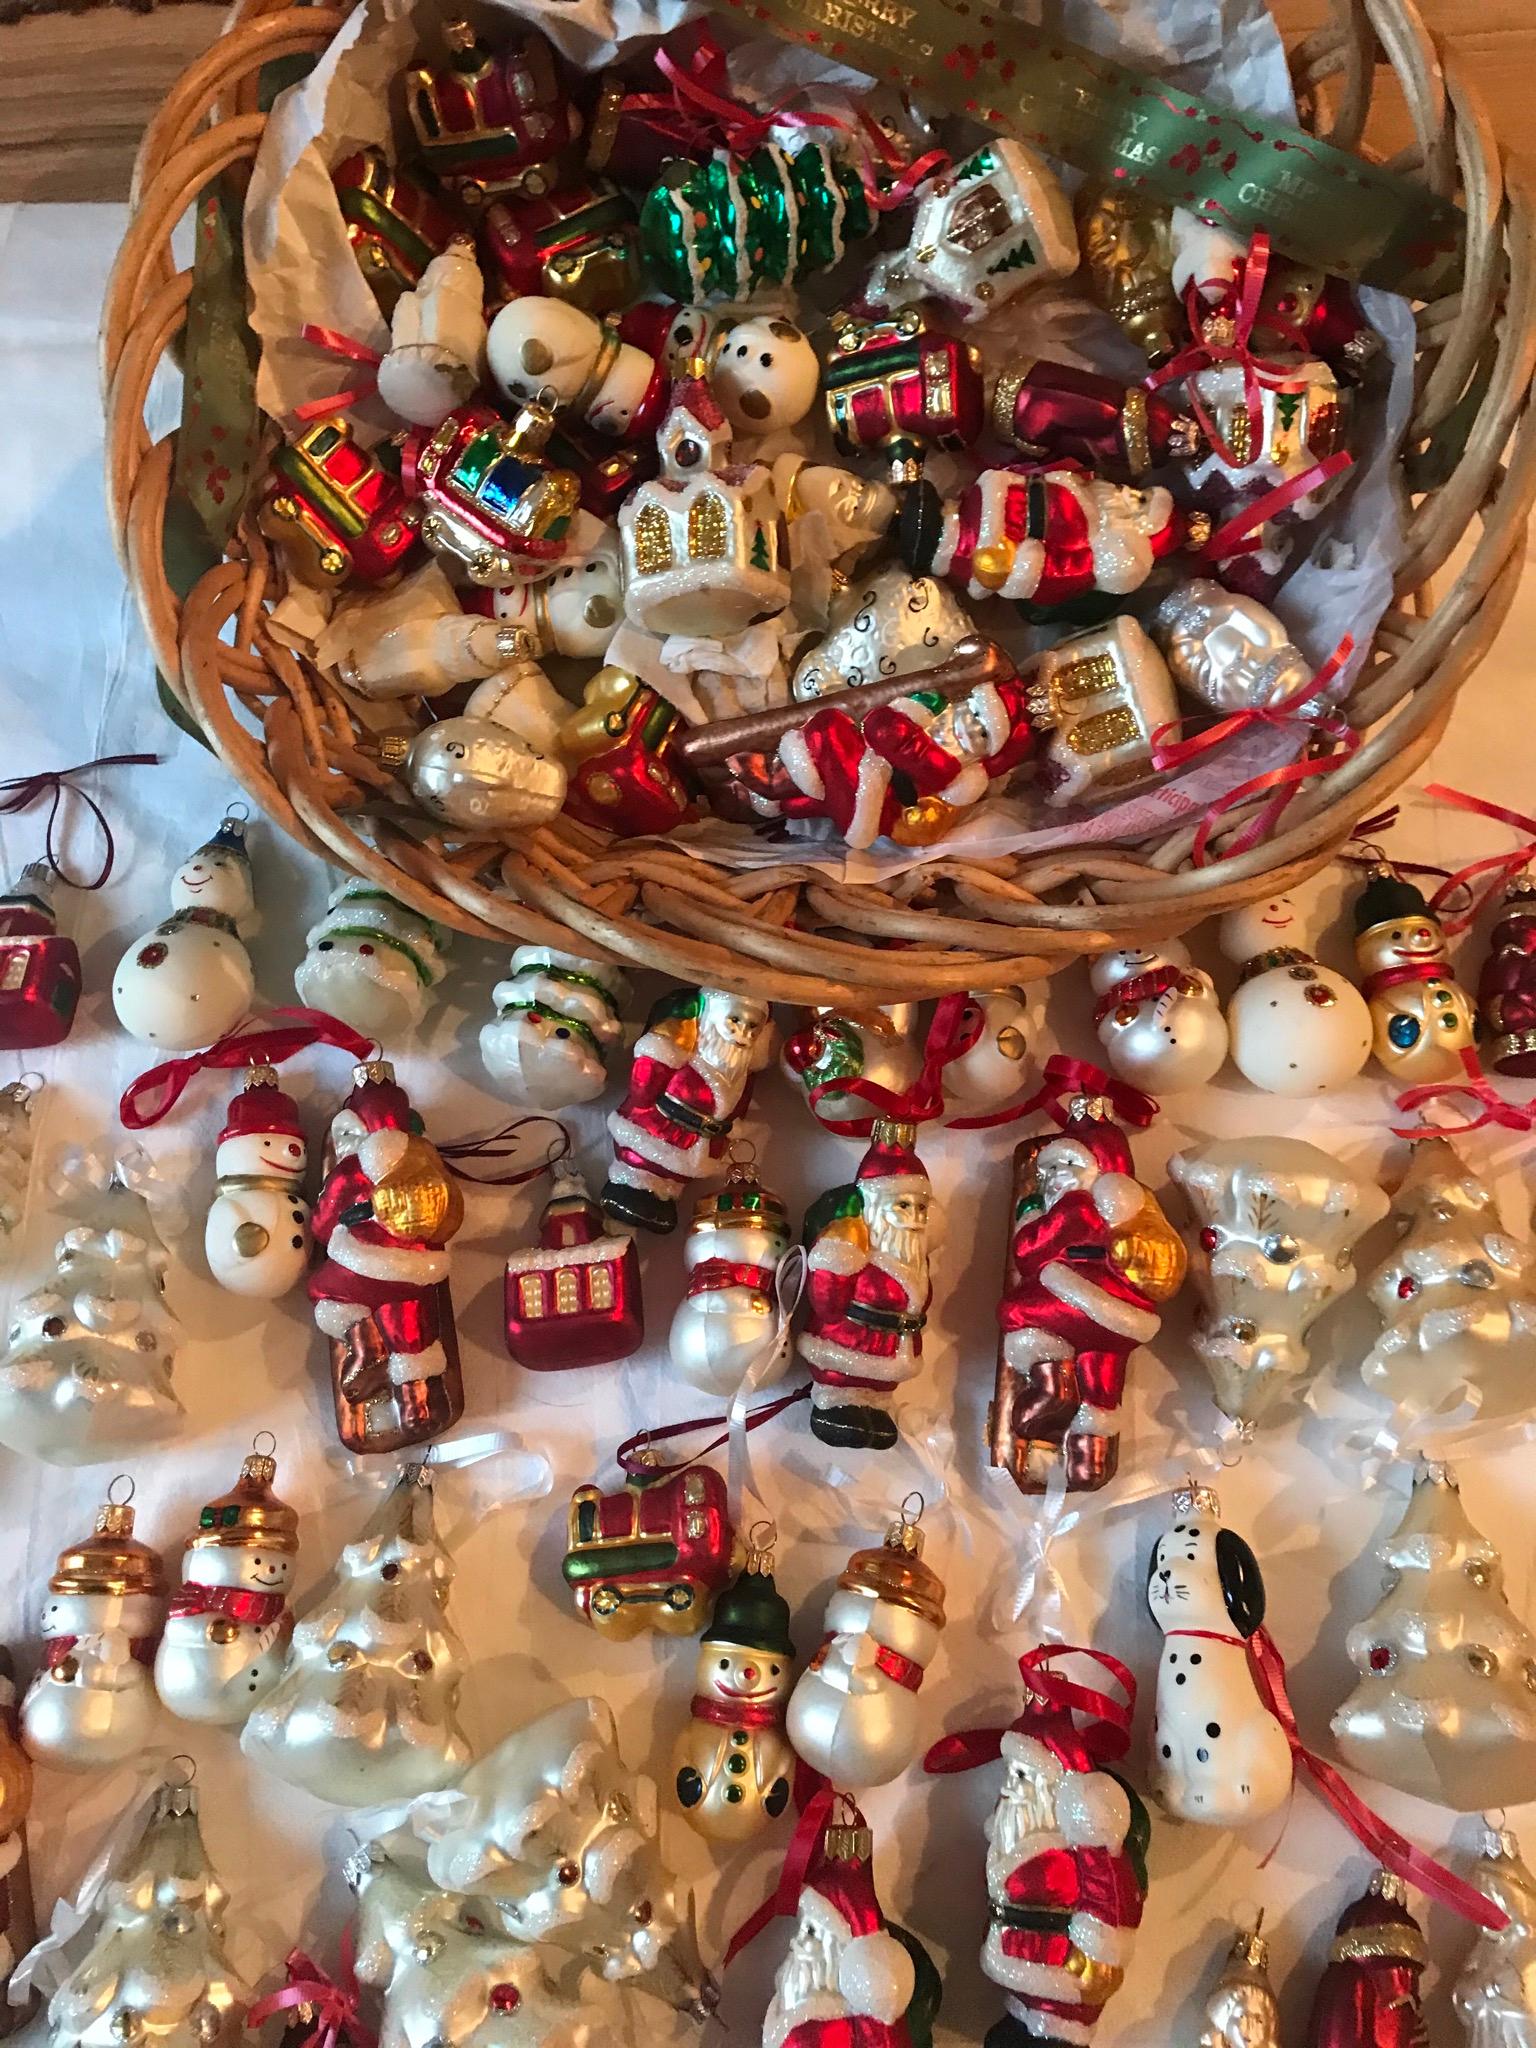 Vintage German art glass handpainted Christmas ornaments figurines 3-5 “ collection.